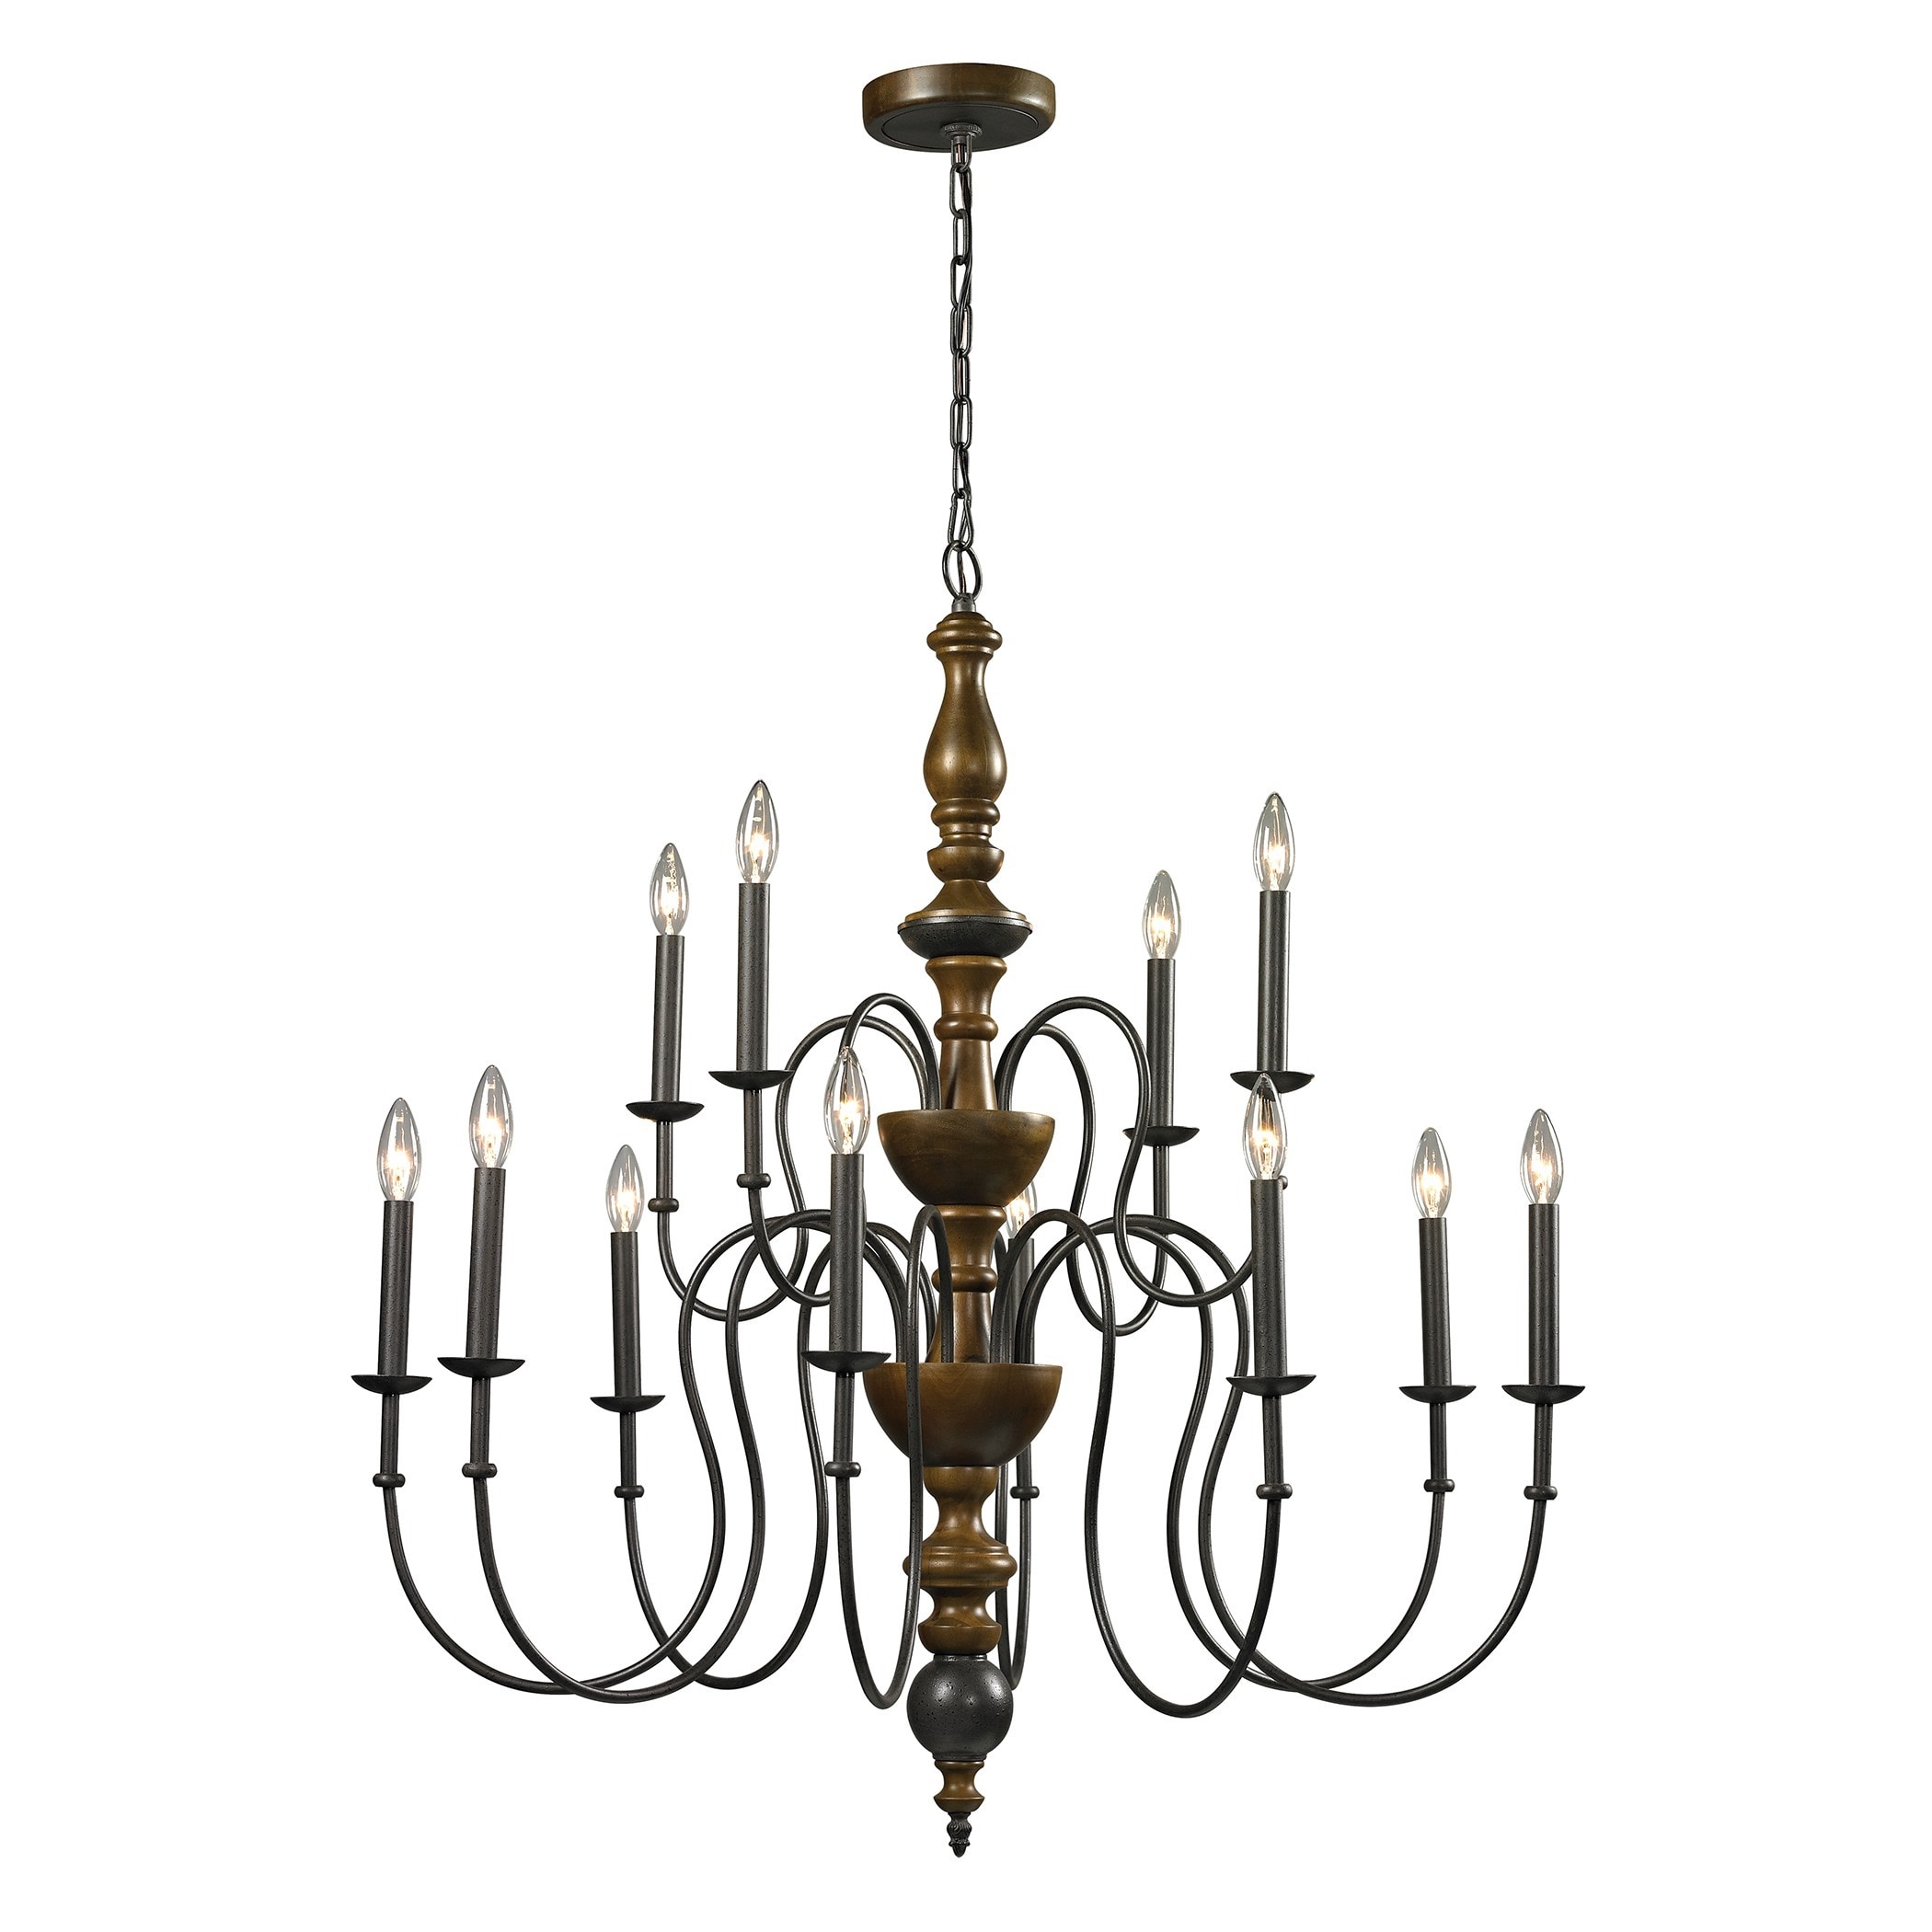 French Country 12 light Vintage Rust Chandelier